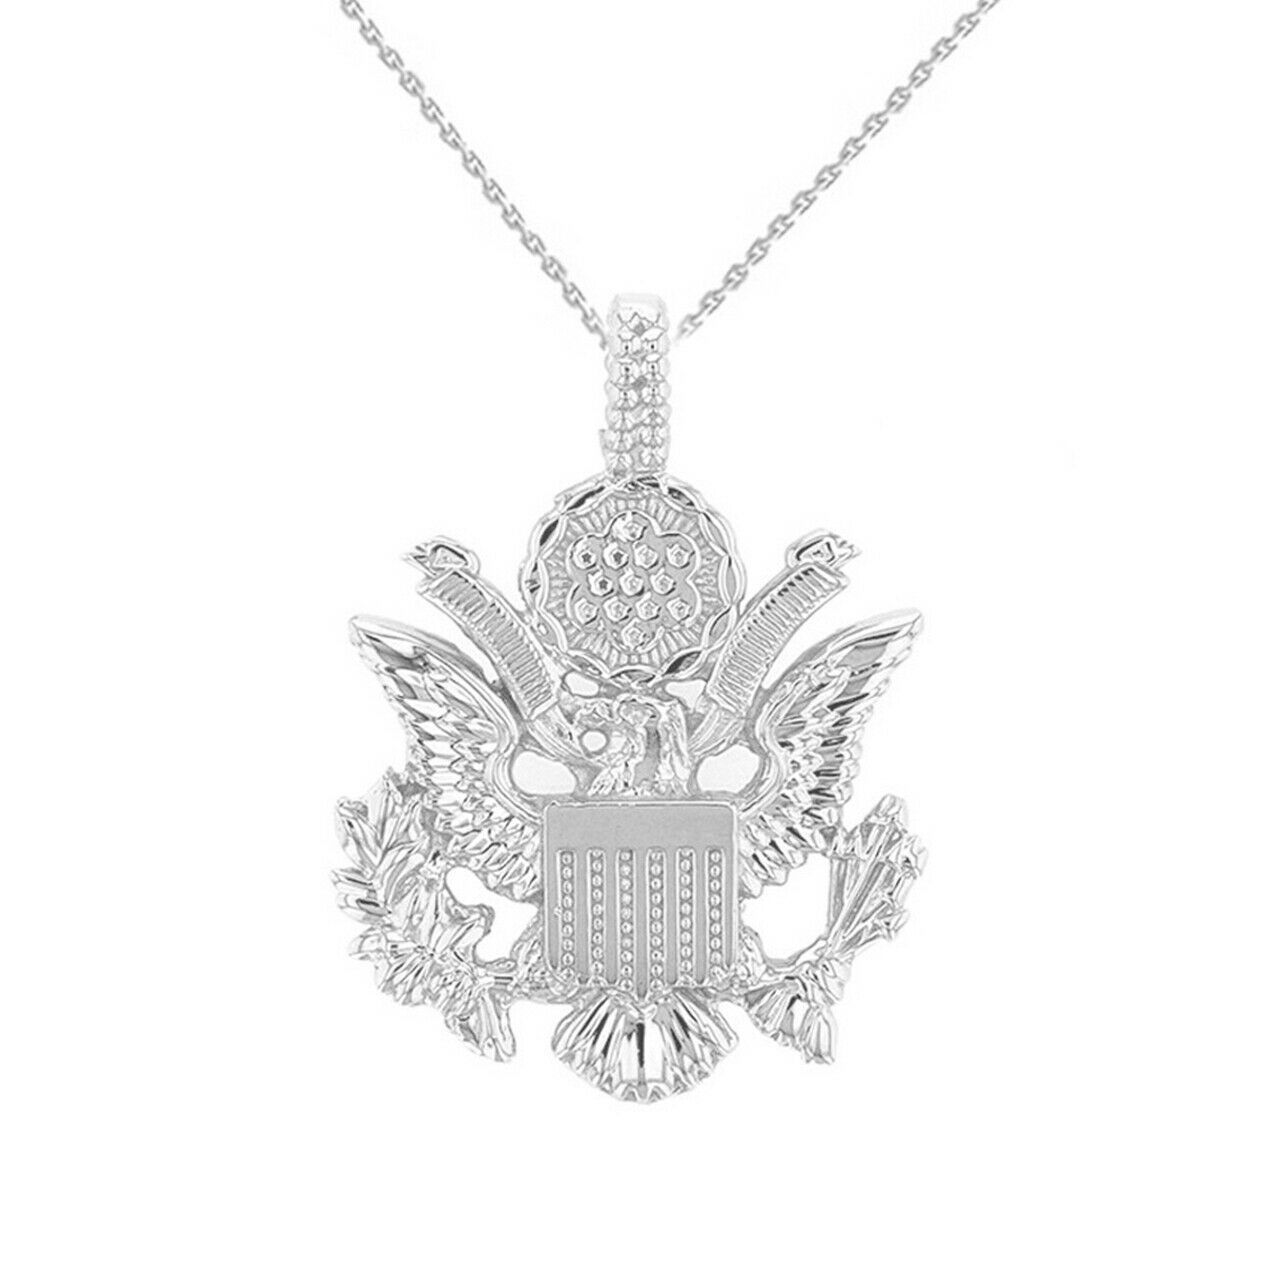 925 Sterling Silver American Eagle Coat of Arms Pendant Necklace - $54.90 - $82.90